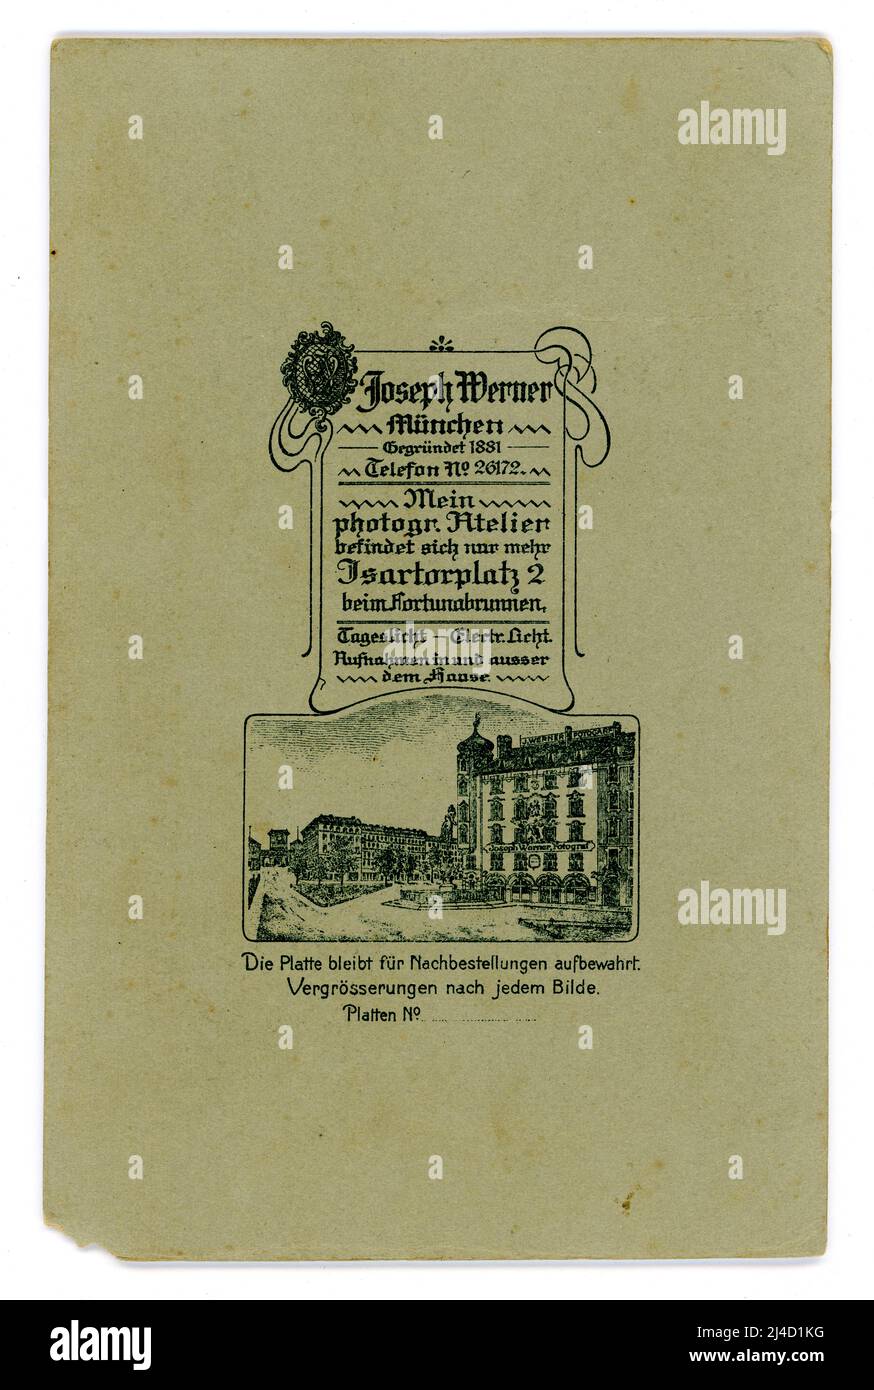 Reverse of original WW1 era cabinet card from the photographic studio of Joseph Werner, at Isartorplatz Munchen (Munich) Bavaria, Germany. An elaborate illustration, engraving of the photographic premises is printed with the location. Circa 1914 Stock Photo